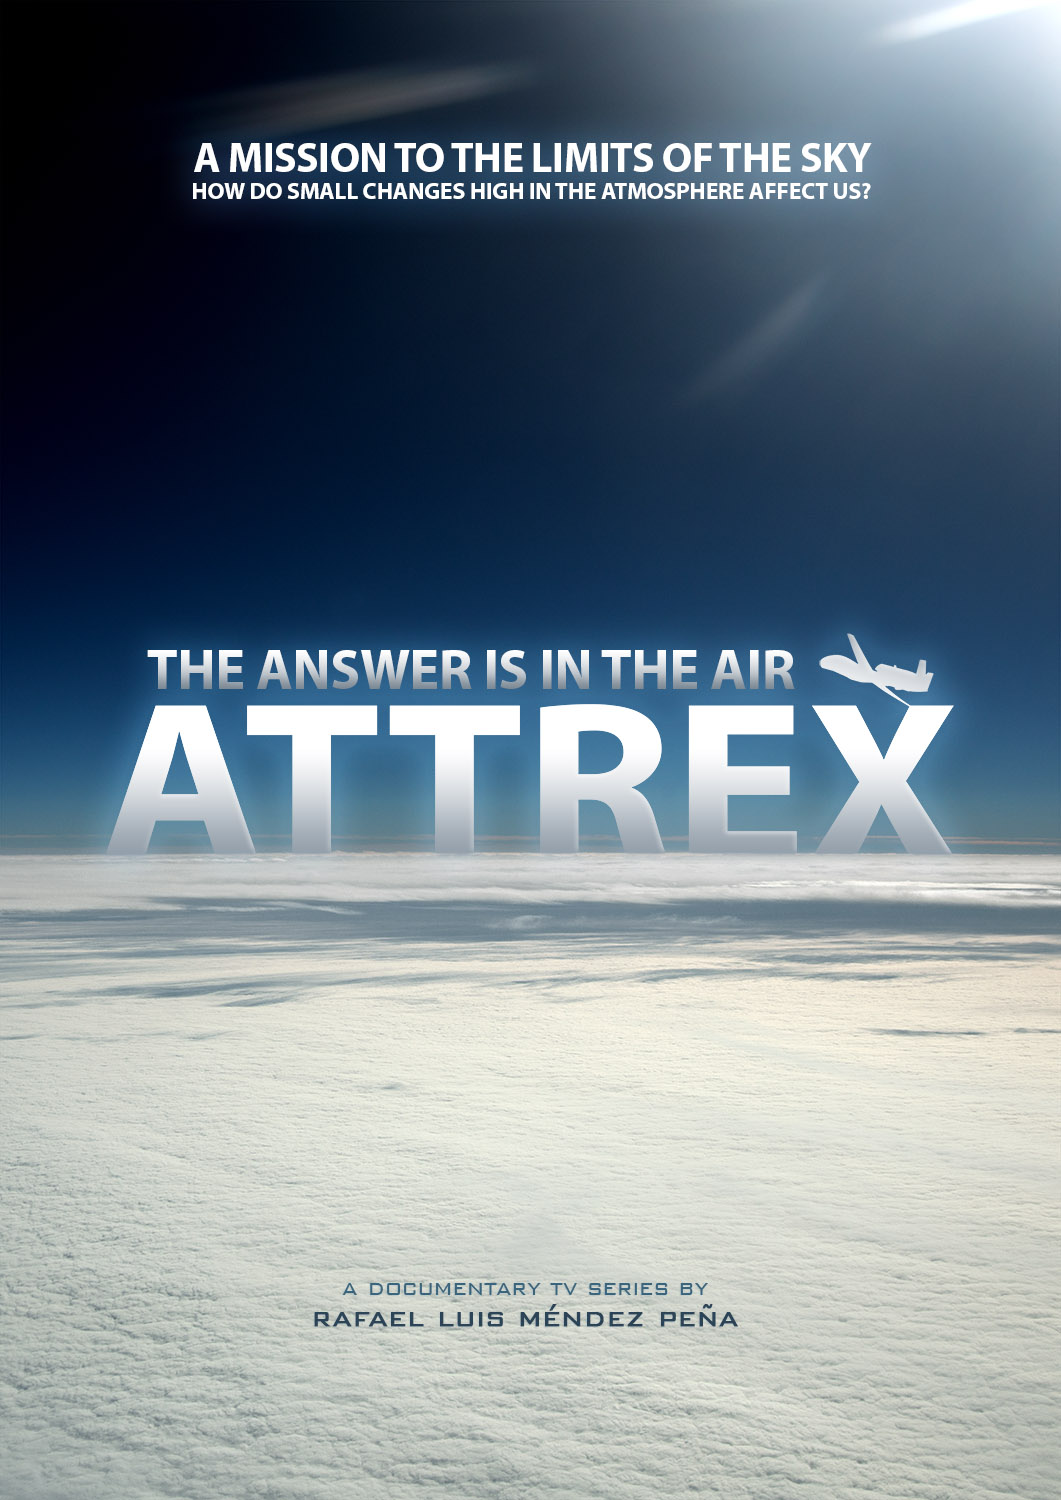 ATTREX: Airborne Tropical Tropopause Experiment